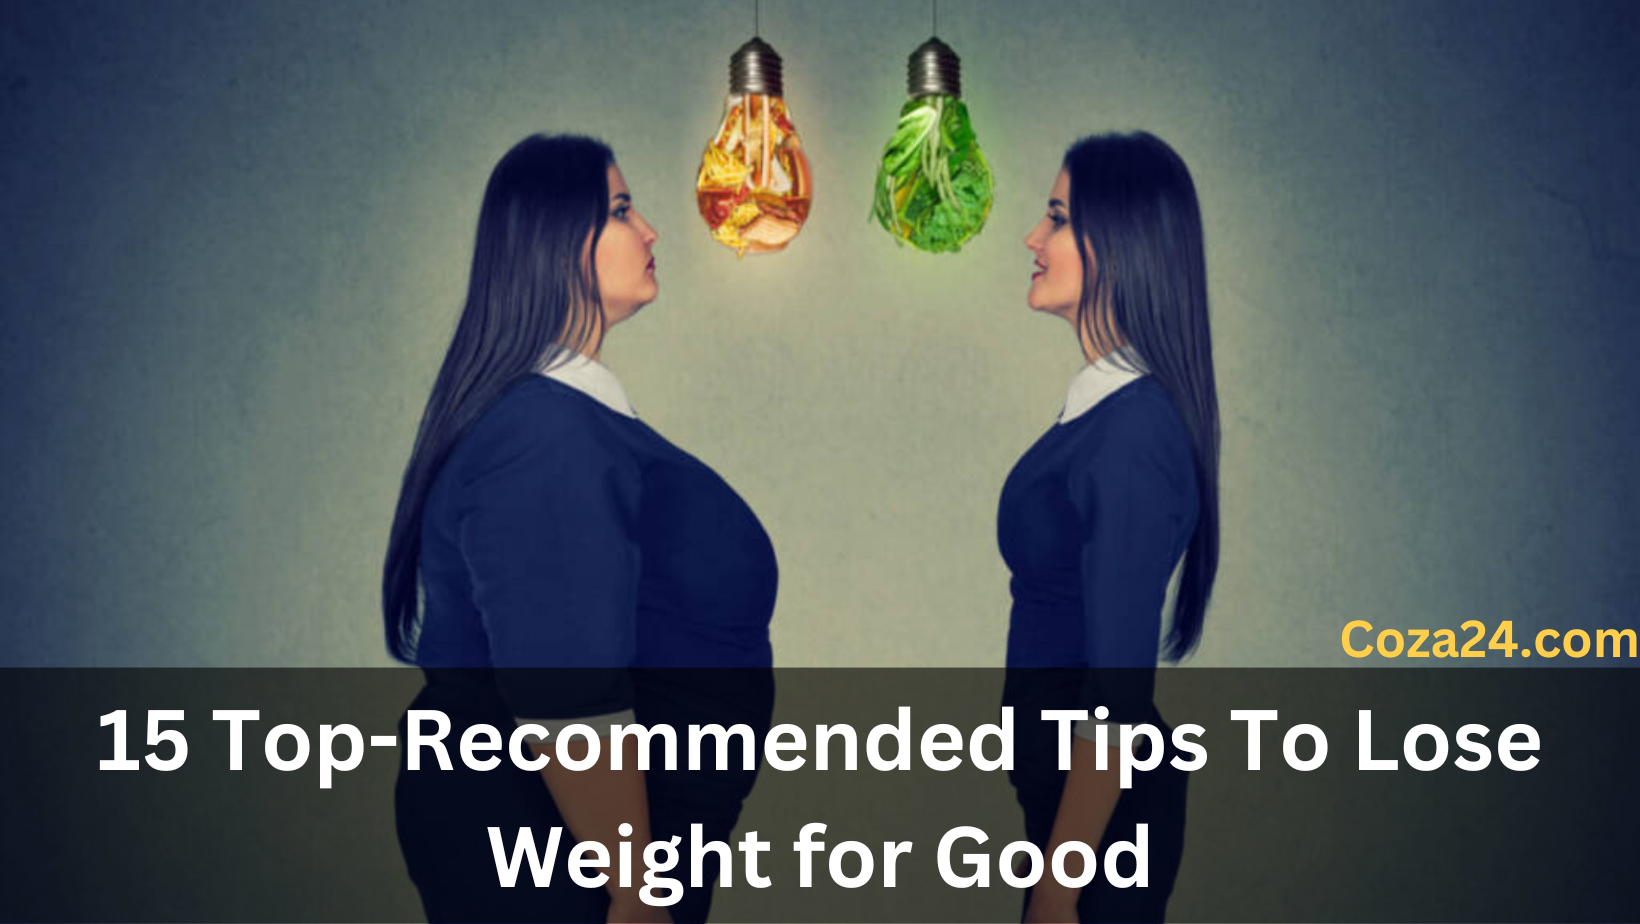 15 Top-Recommended Tips To Lose Weight for Good